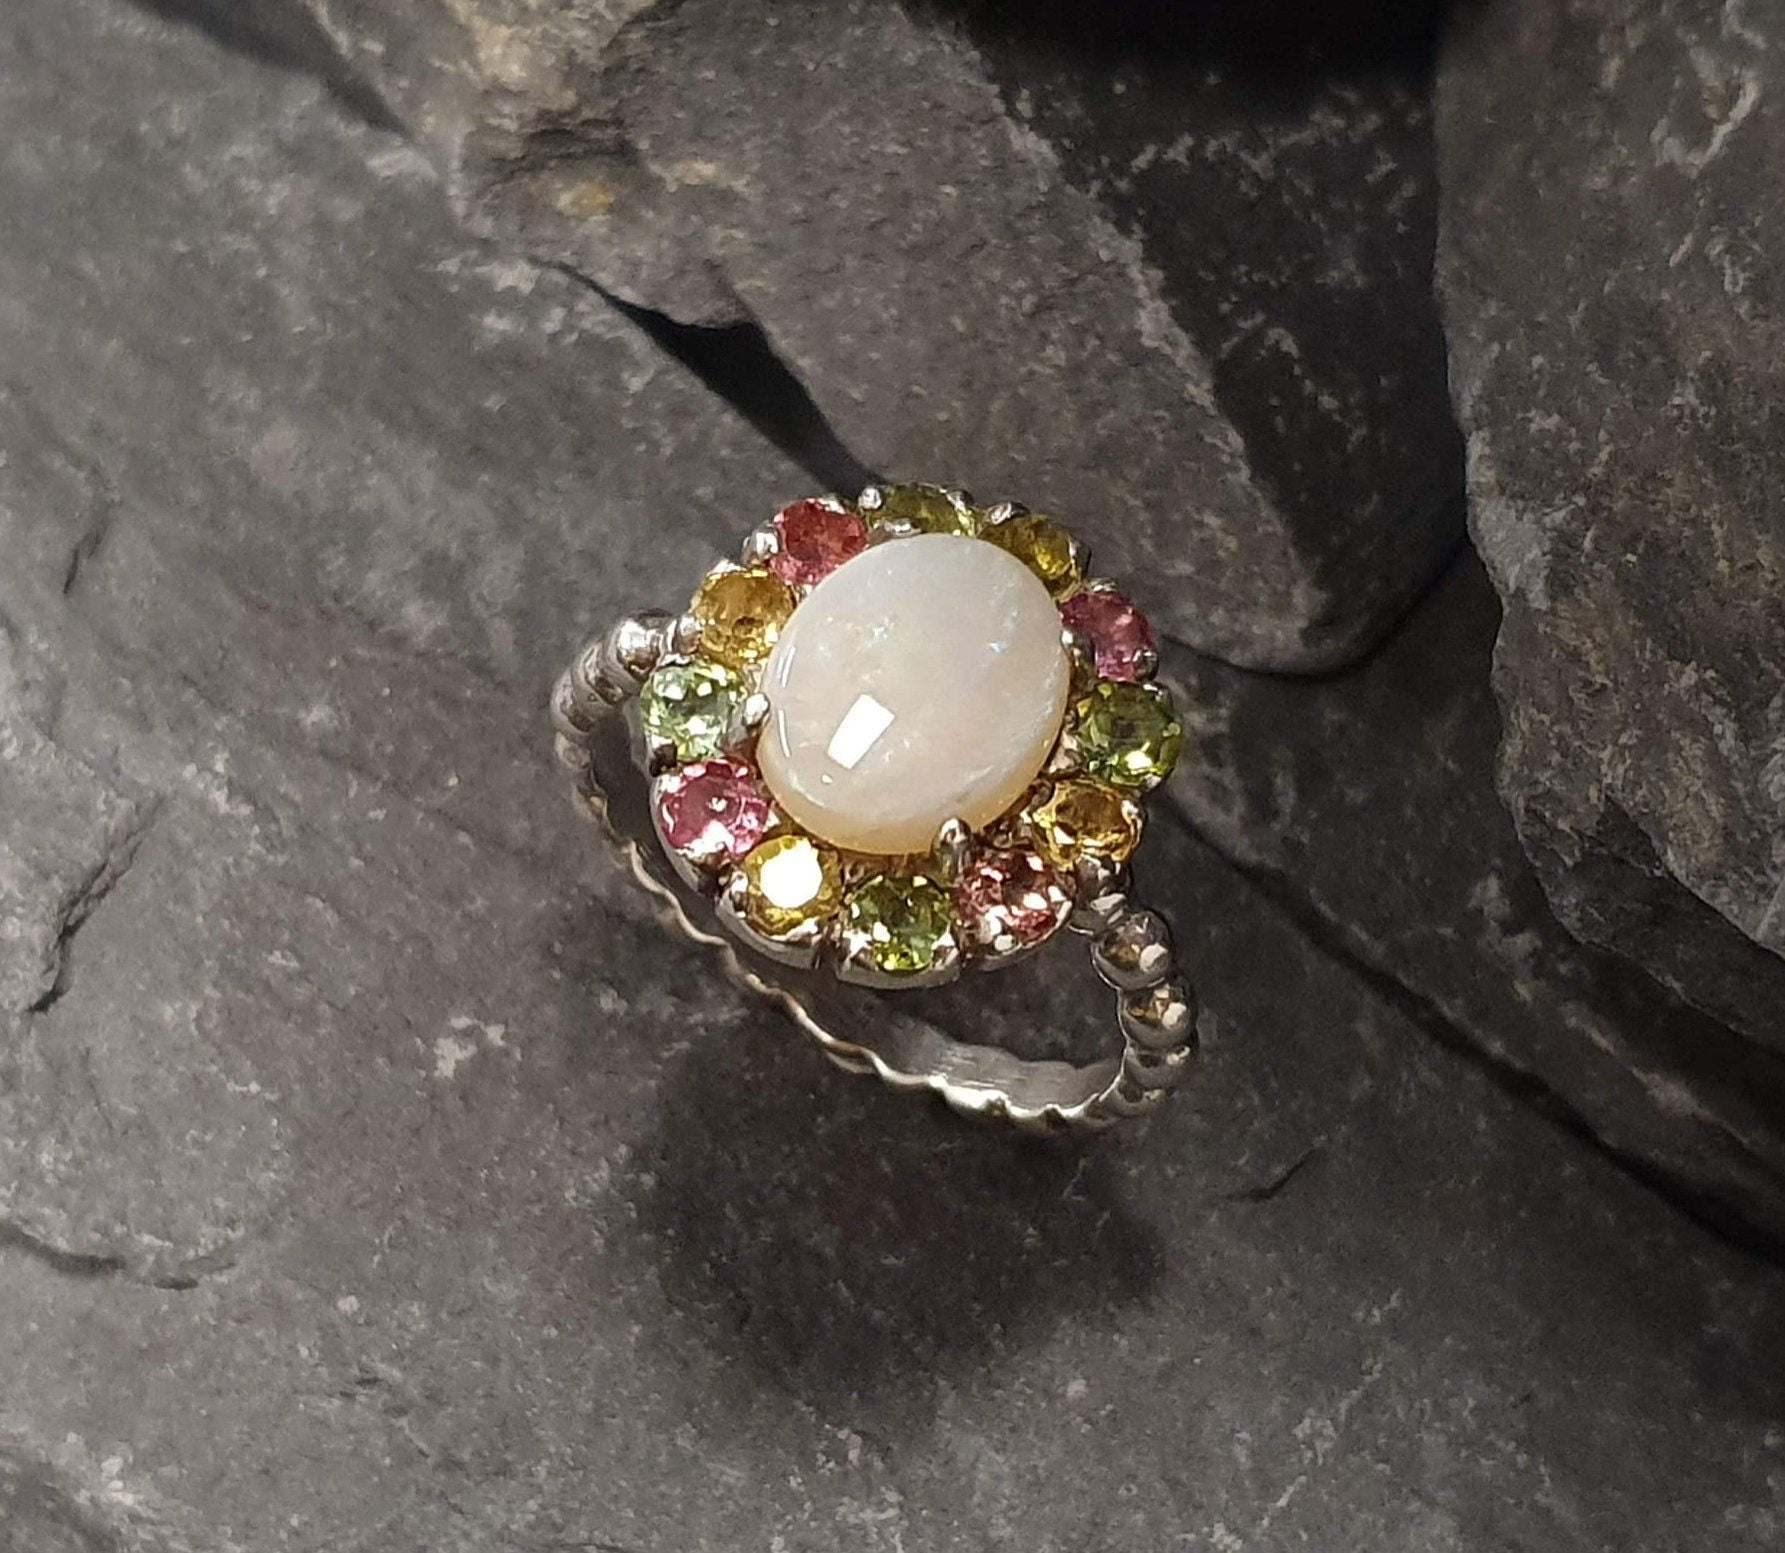 Precious Opal Ring, Natural Opal, Victorian Ring, October Birthstone Ring, White Oval Ring, Tourmaline Ring, Vintage Ring, Solid Silver Ring